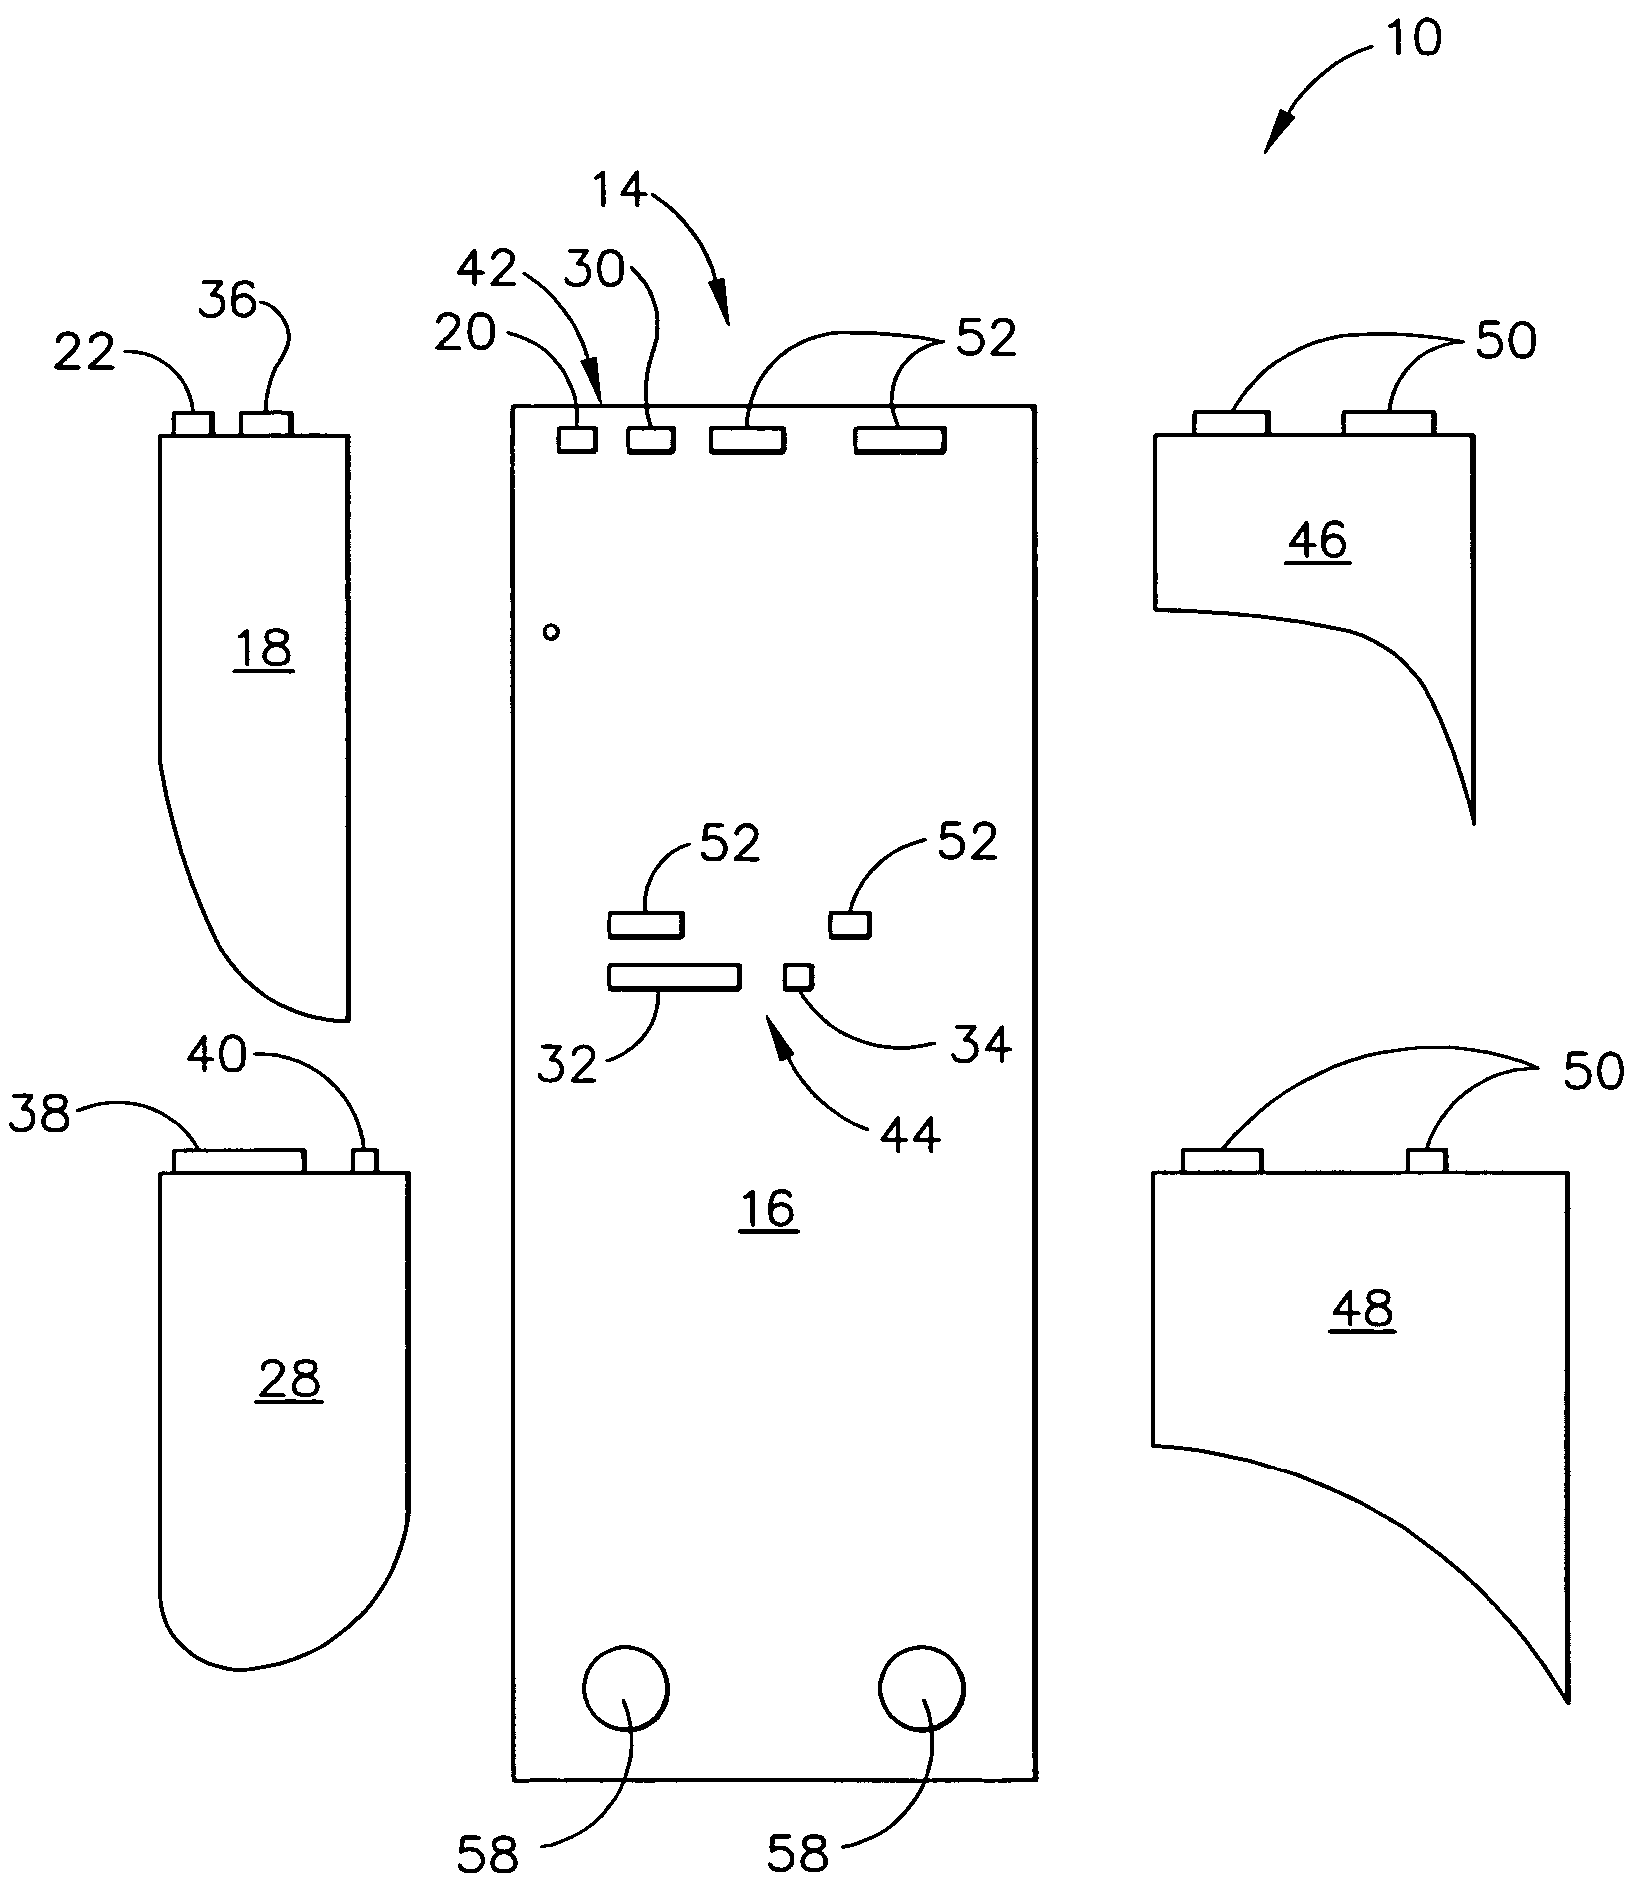 Electroplating apparatus and method for making an electroplating anode assembly